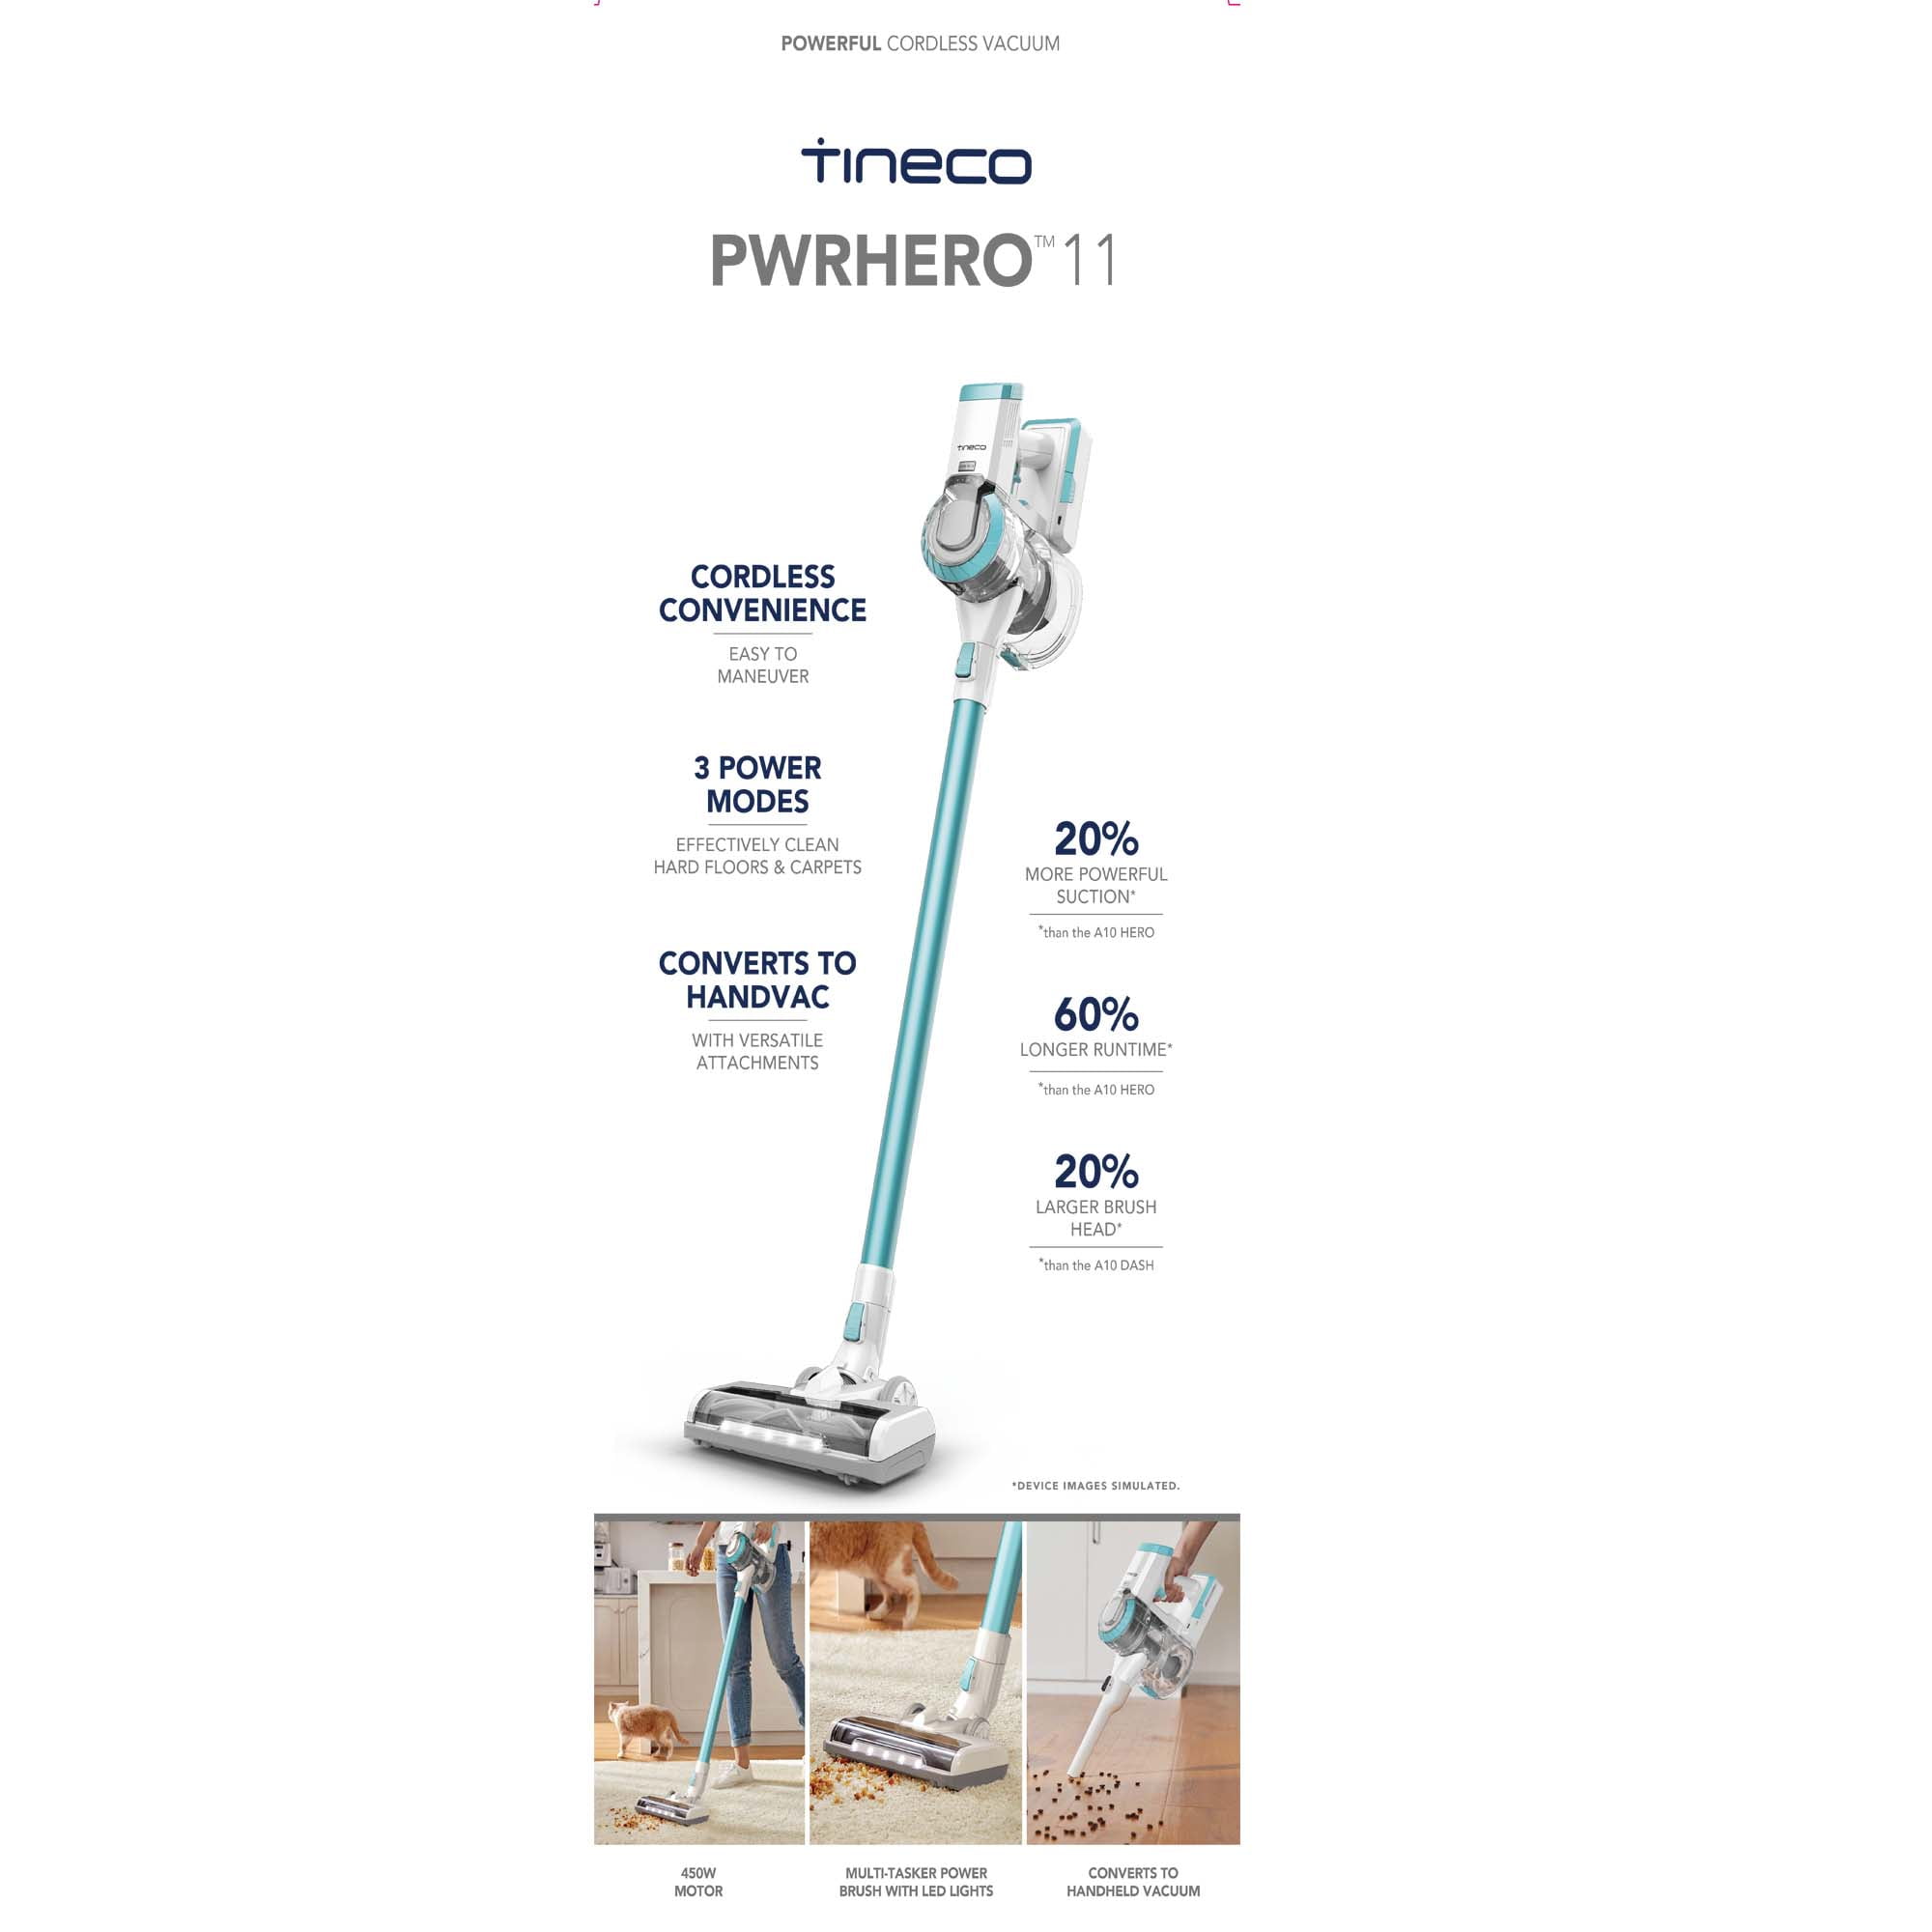 Cleaner Suction for Tineco Pet Powerful Cordless Vacuum Hair Carpet, with PWRHERO and Stick Hard 11 Lightweight Surfaces